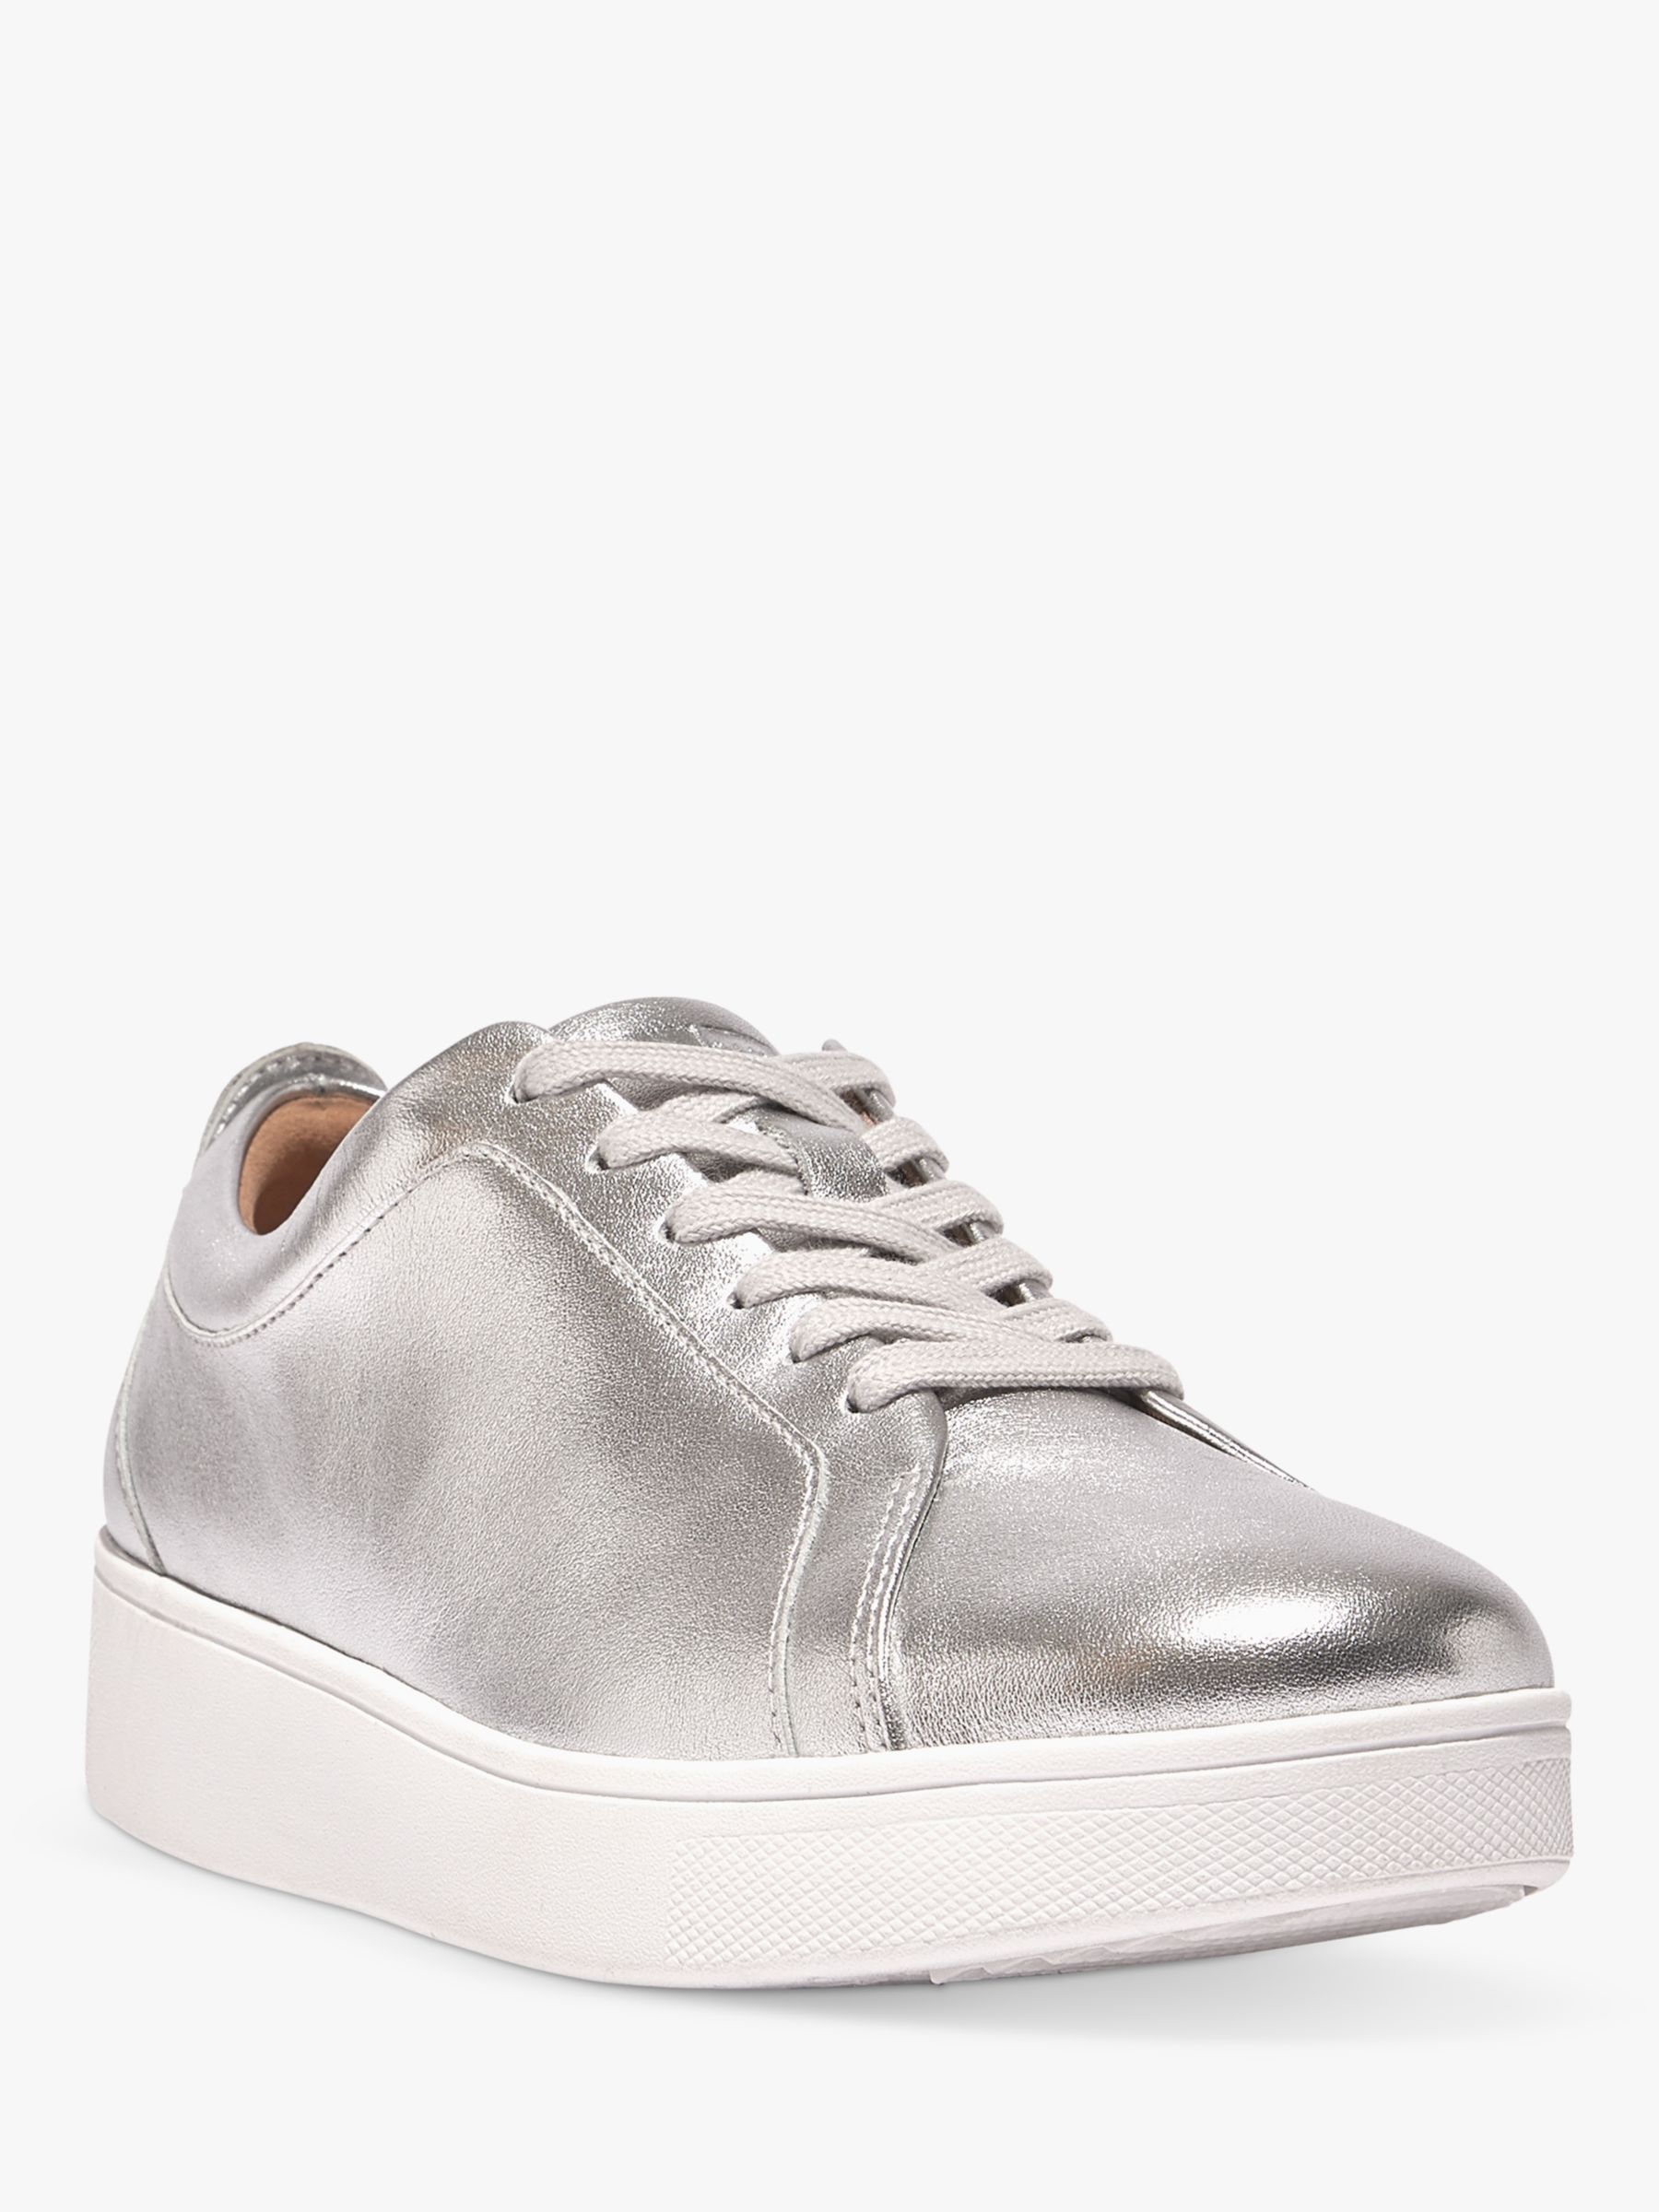 Women's Silver Trainers